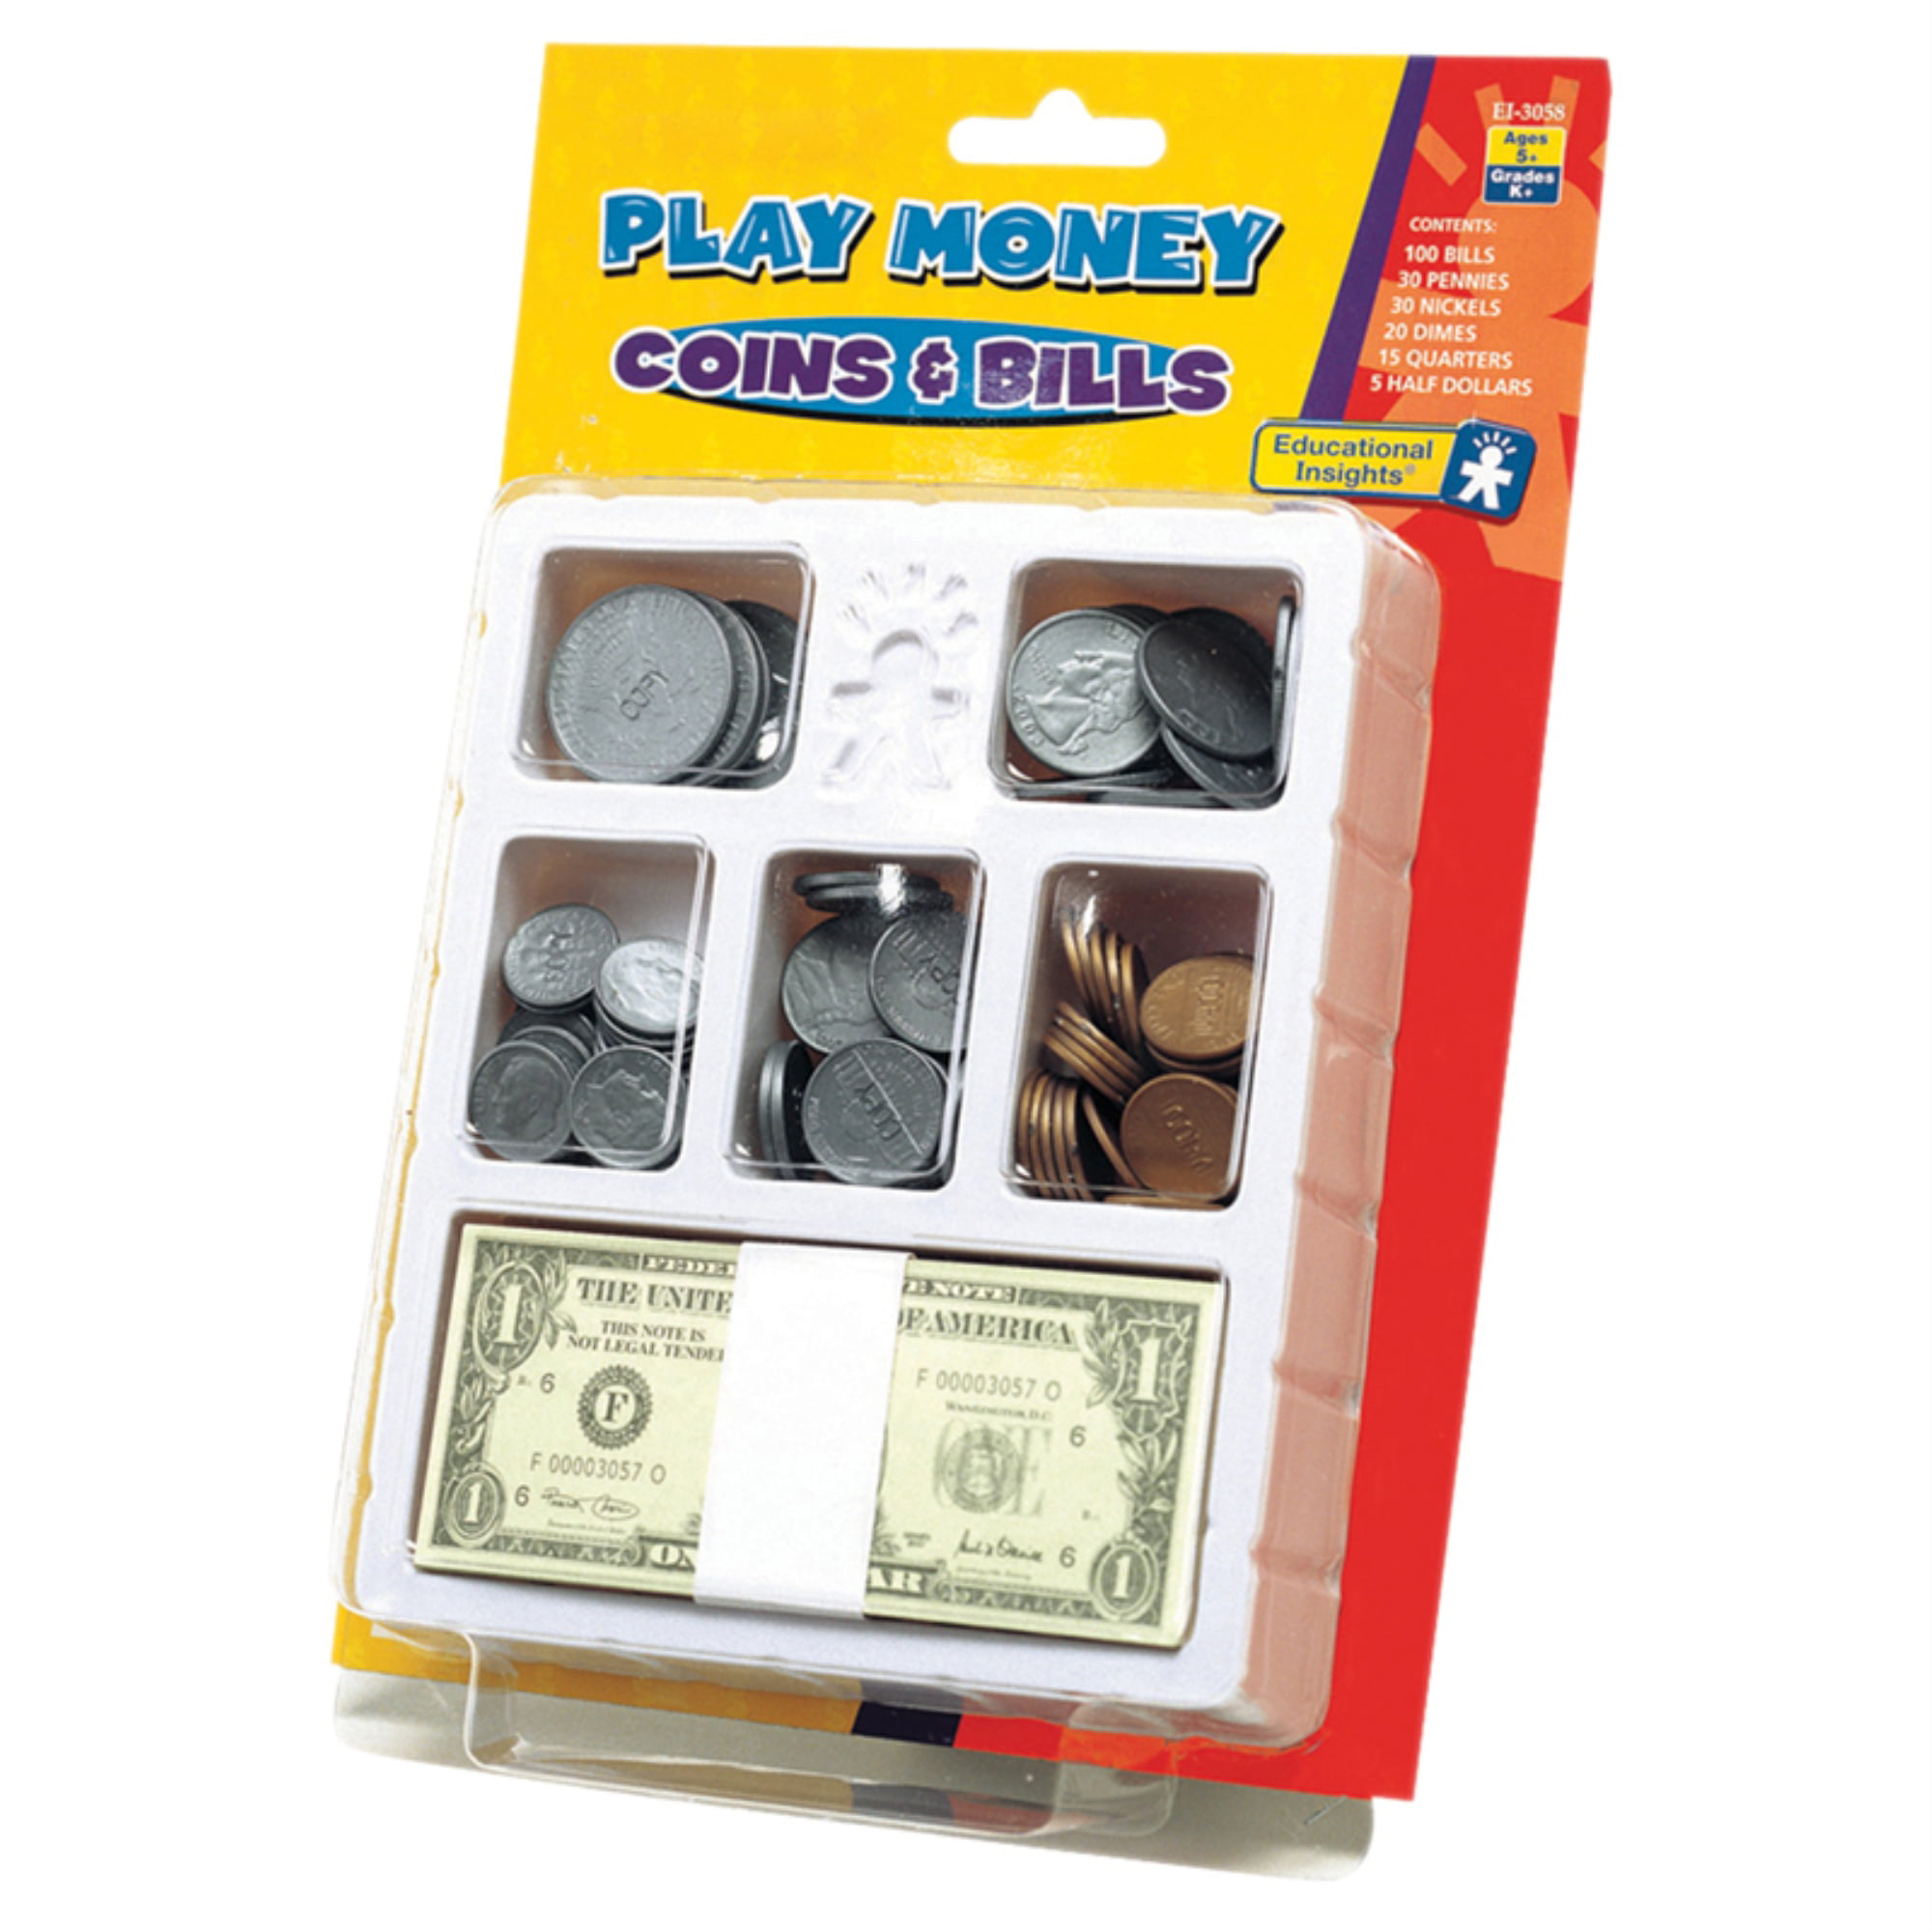 2xSTERLING PLAY MONEY SET TY2404 EDUCATIONAL LEARNING AID MATHS SKILLS TOY SET 